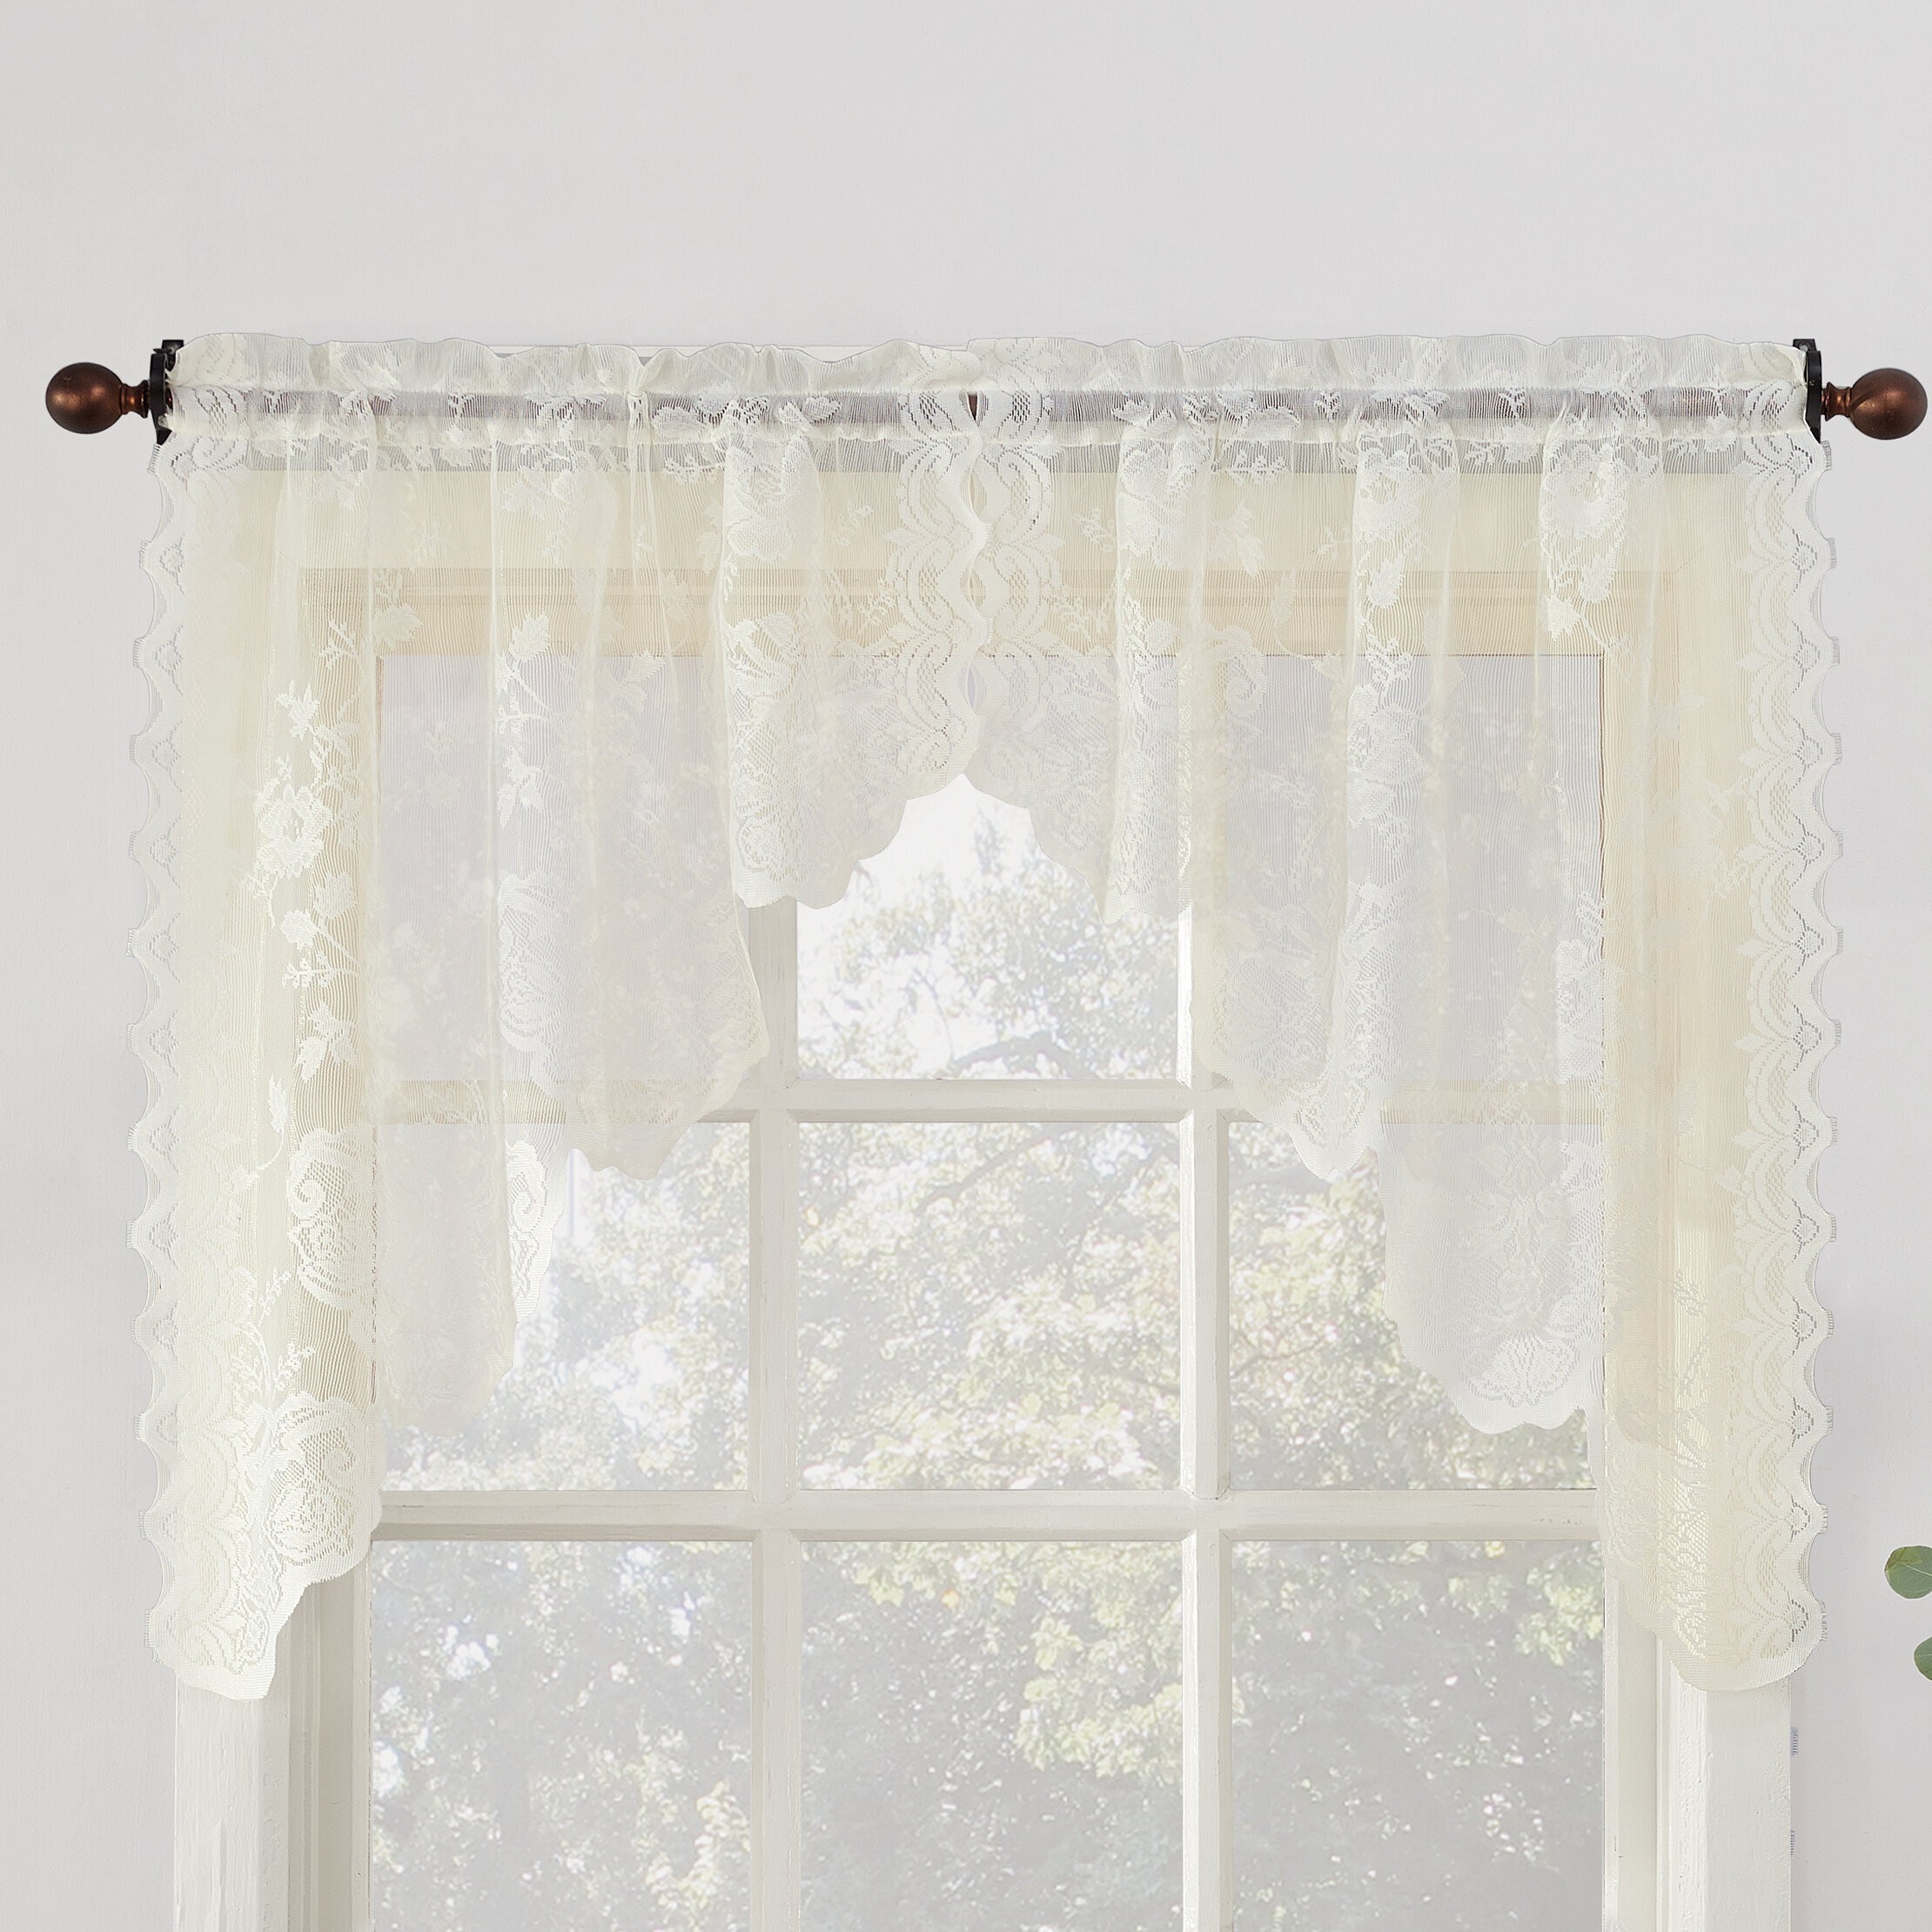 Impressive voile valance Home Kitchen Shades Curtain Voile Tie Up Valance Curtains Floral Window Treatments Scalloped Balloon Tulle Fabric Drapes For Bedroom Bathroom Living Room Windows Shade Blinds